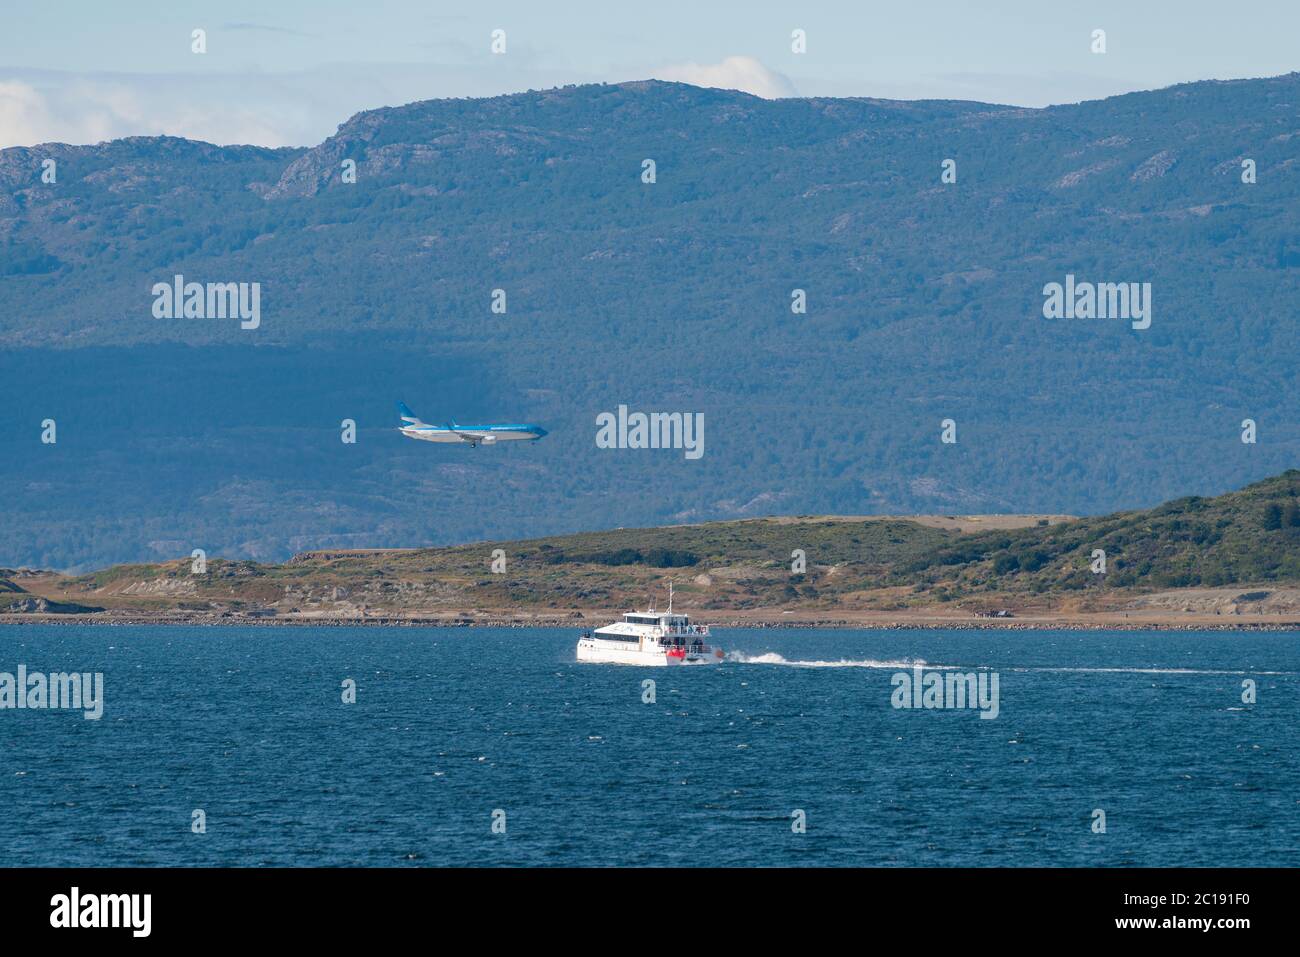 Airplane on approach to Ushuaia International Airport, Argentina Stock Photo